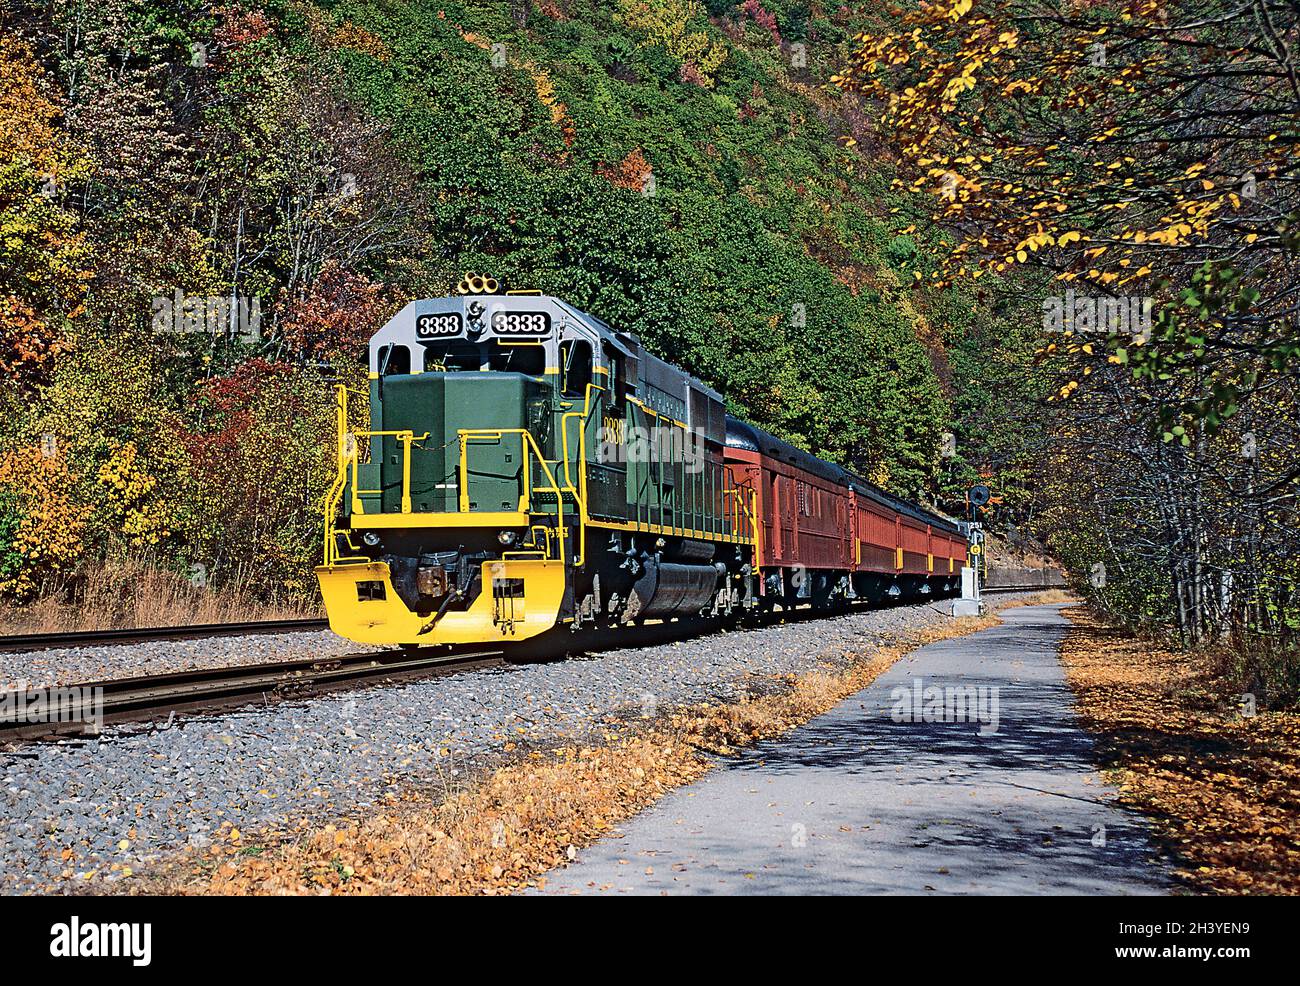 Autumn Passenger Train Excursion with Colorful Leaves Stock Photo